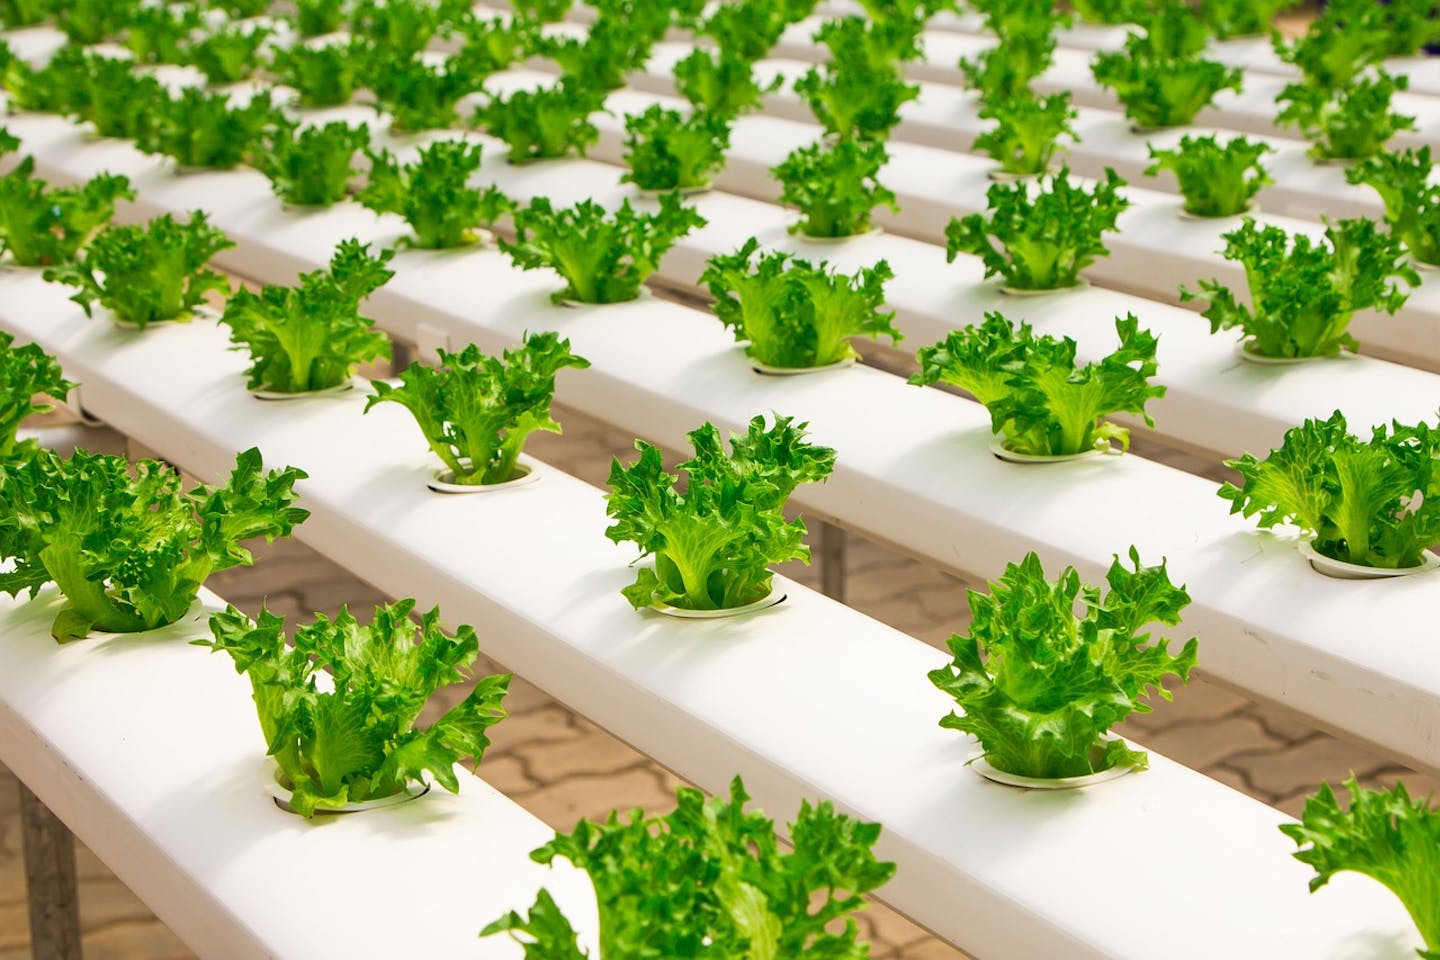 How to Prepare for Food Shortages Using Hydroponics